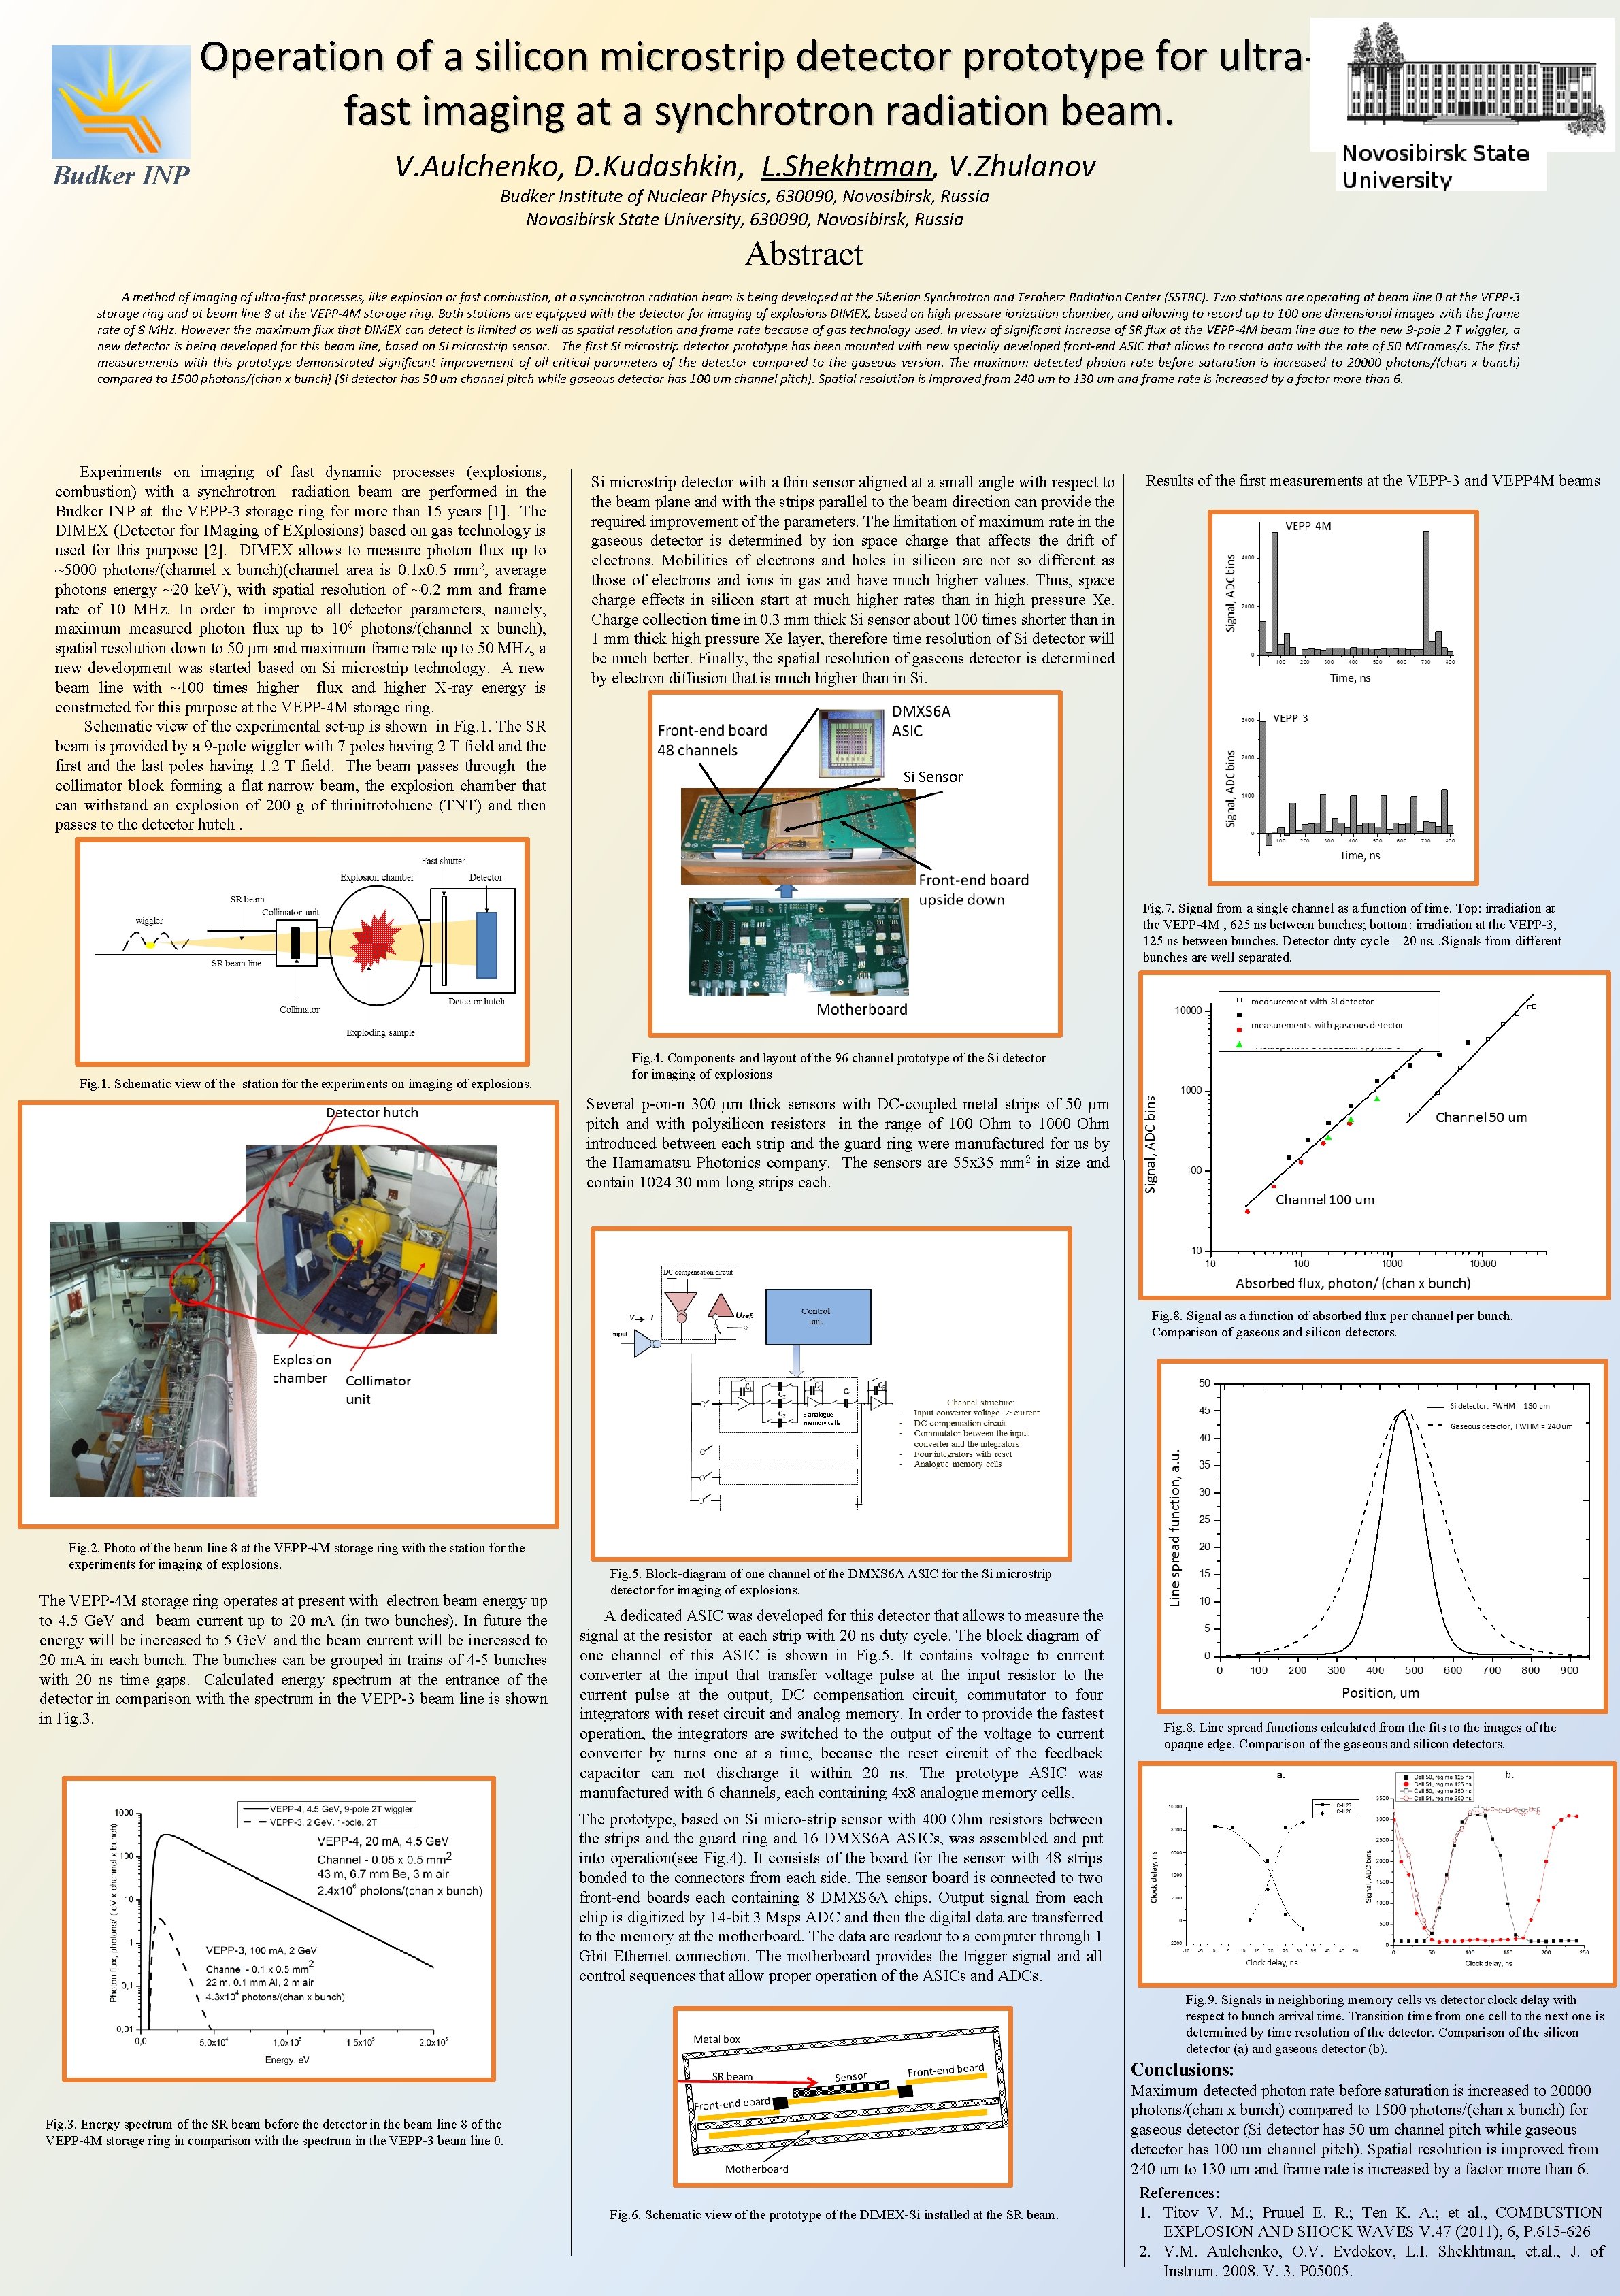 Operation of a silicon microstrip detector prototype for ultrafast imaging at a synchrotron radiation